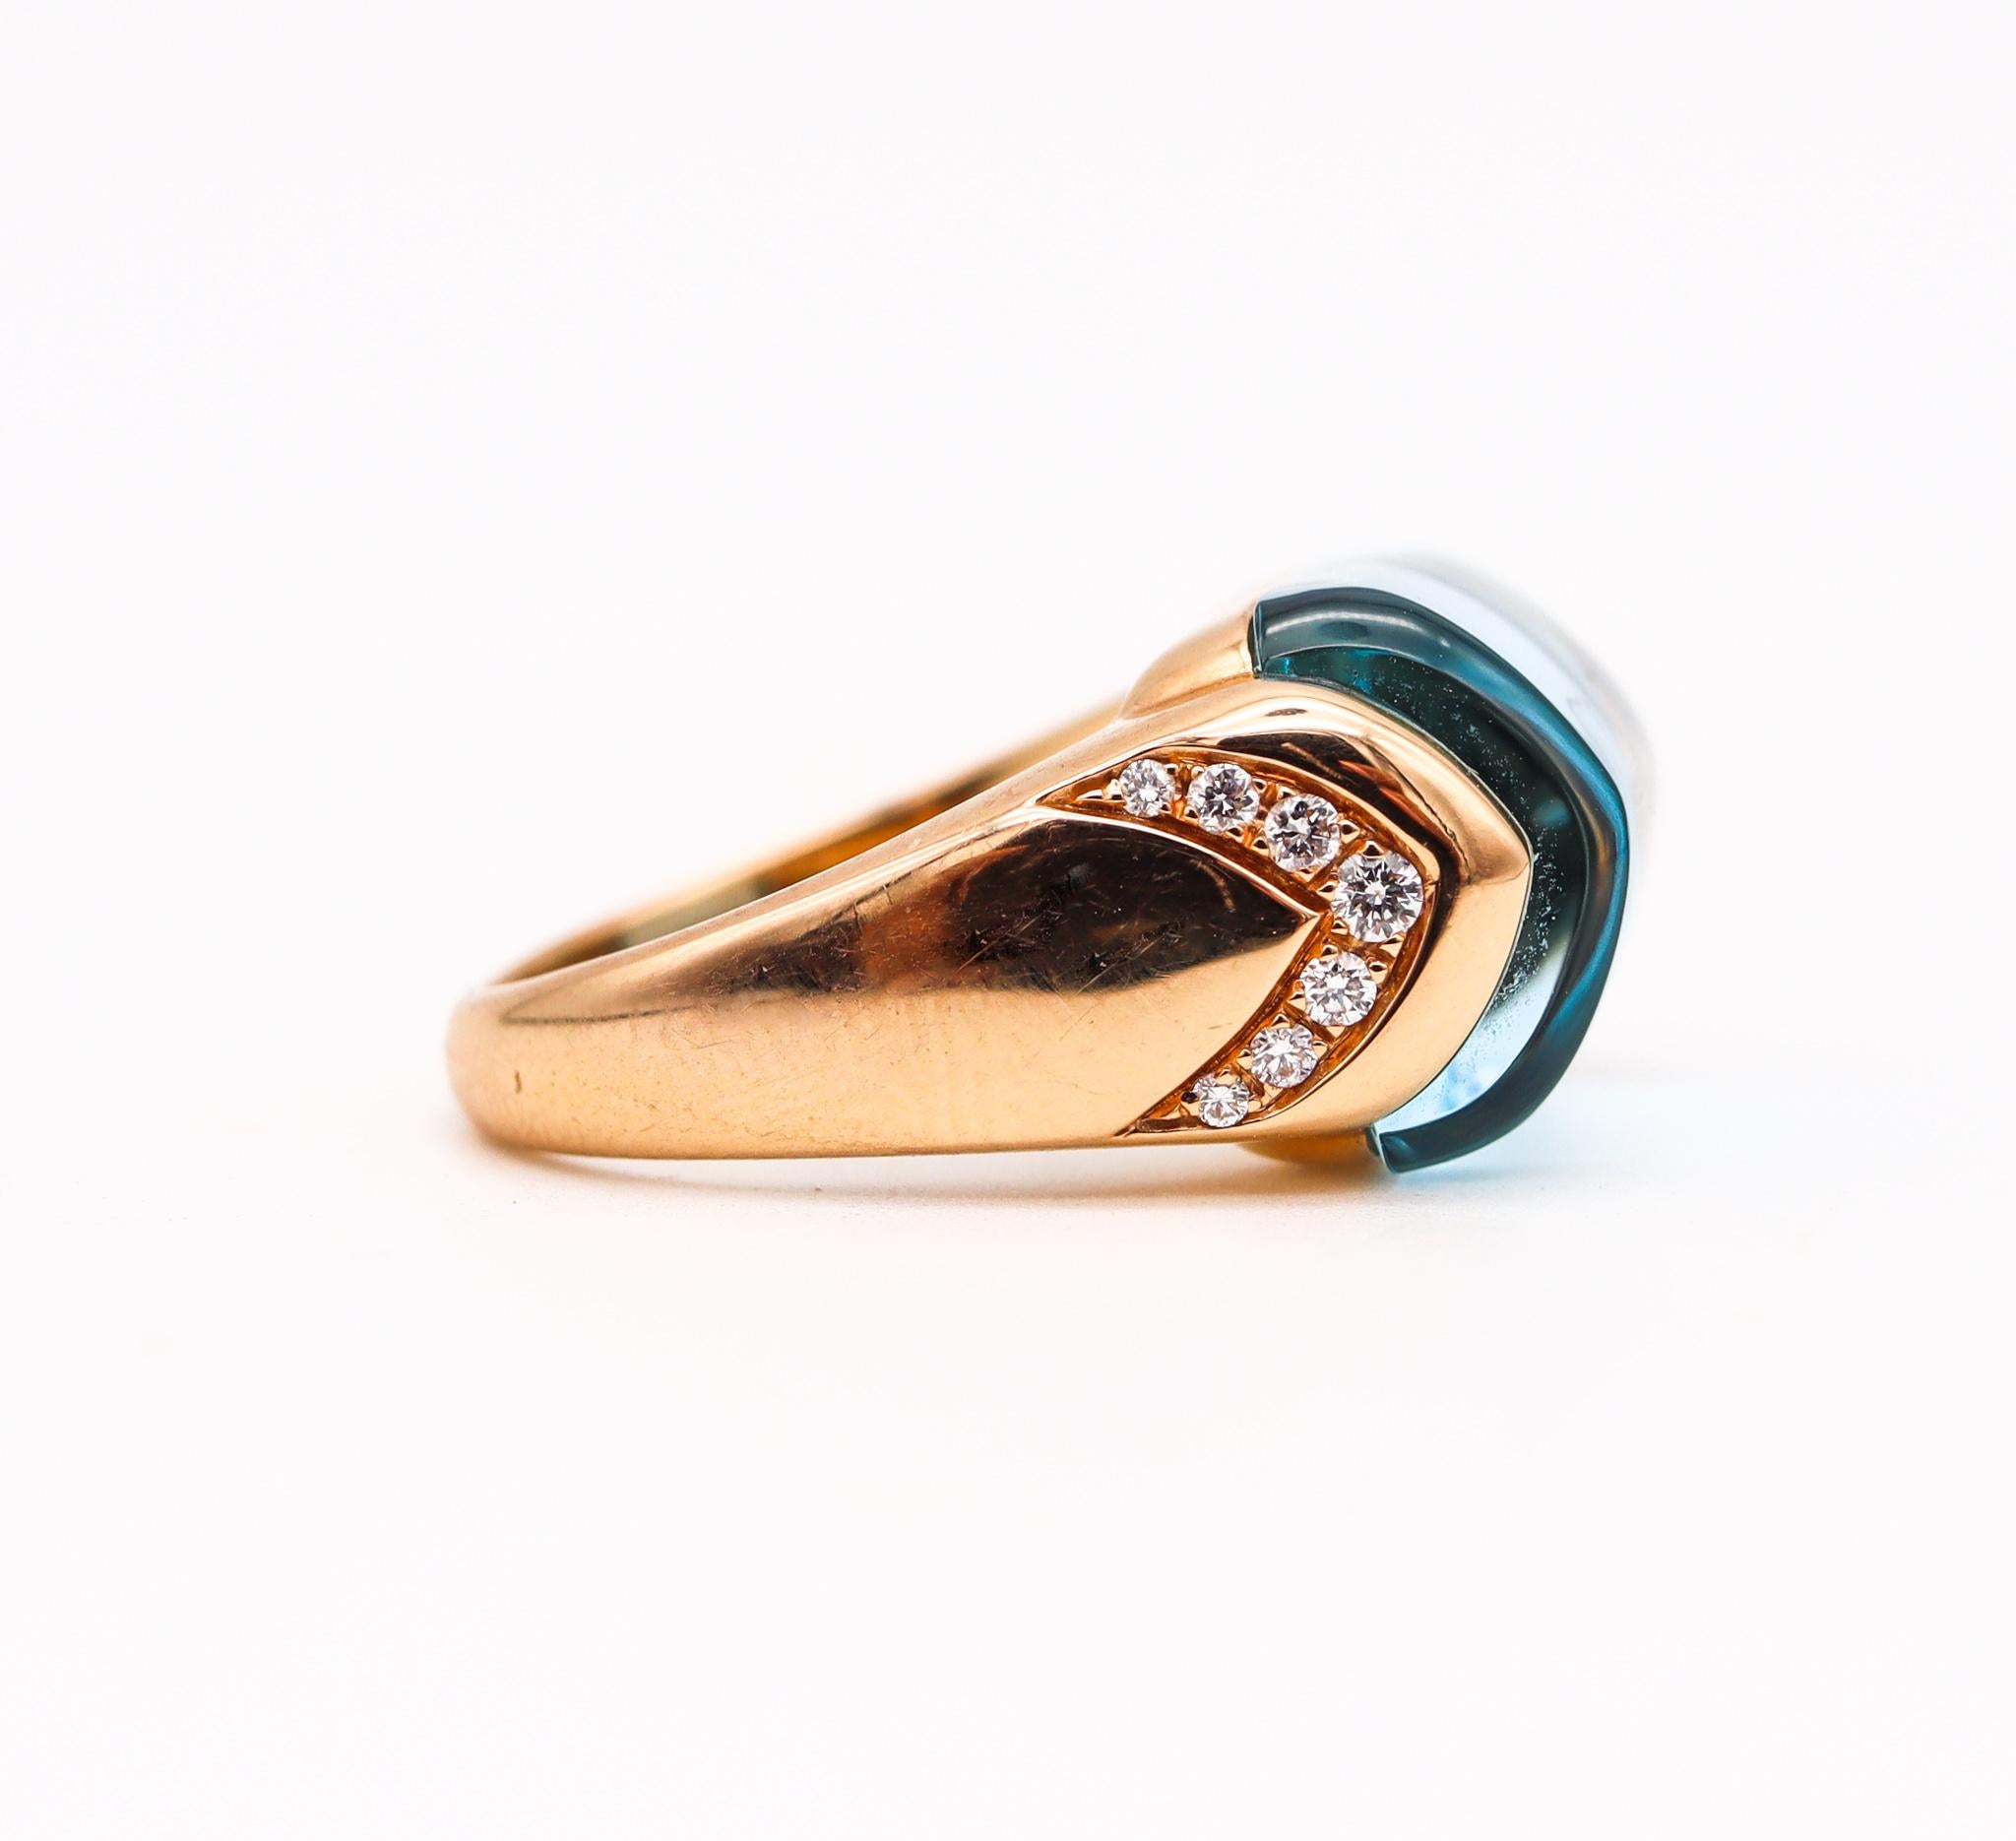 Sugarloaf Cabochon Bvlgari Roma Mvsa Cocktail Ring in 18KT Gold with 6.84 Cts in Diamonds and Topaz